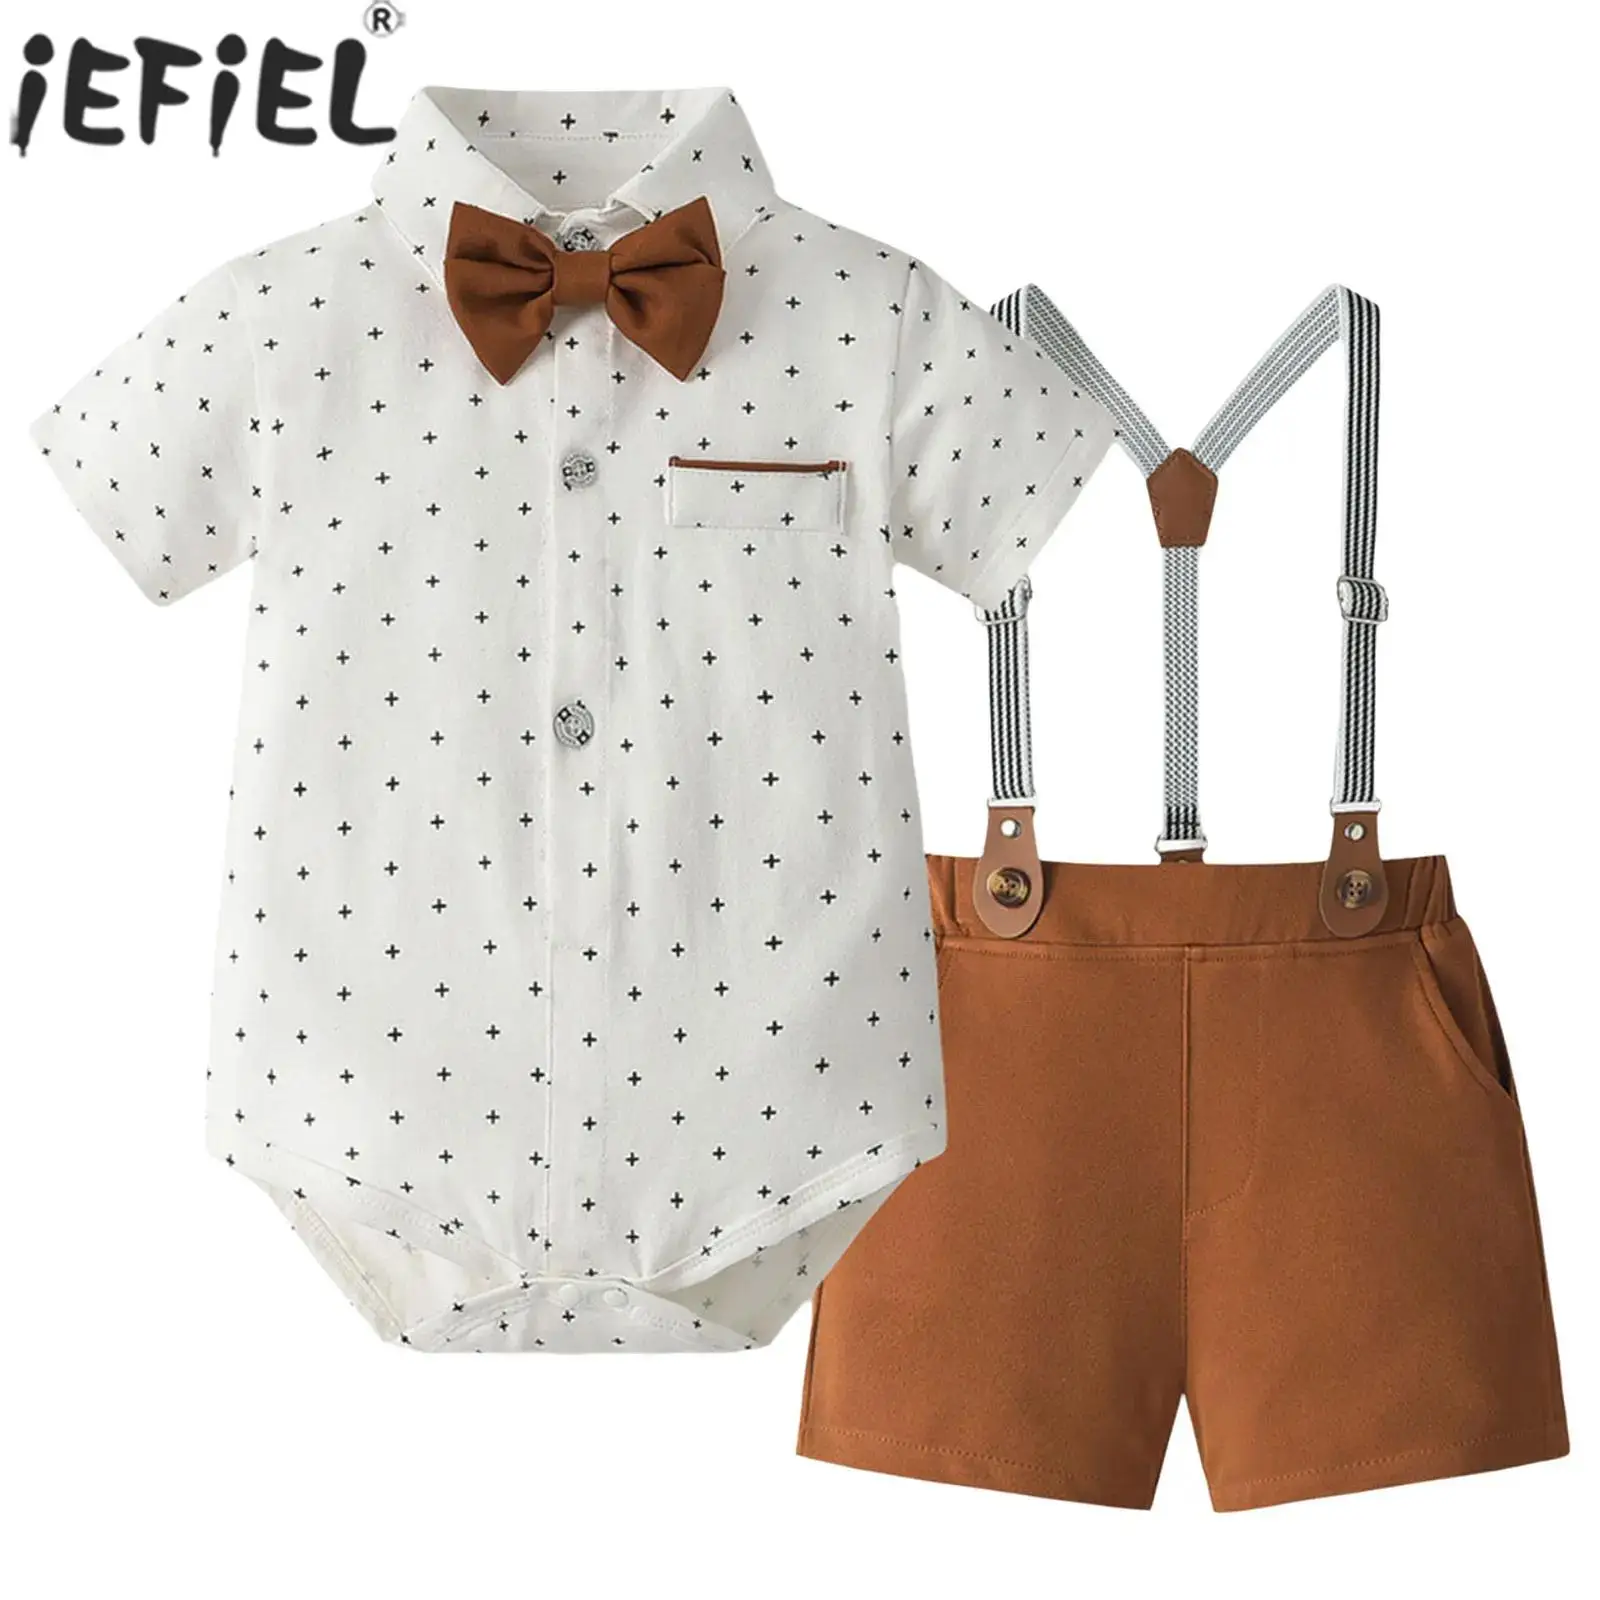 

Little Boys Summer Formal Gentleman Suit Baptism Birthday Wedding Party Outfit Short Sleeve Romper with Bow Suspender Shorts Set